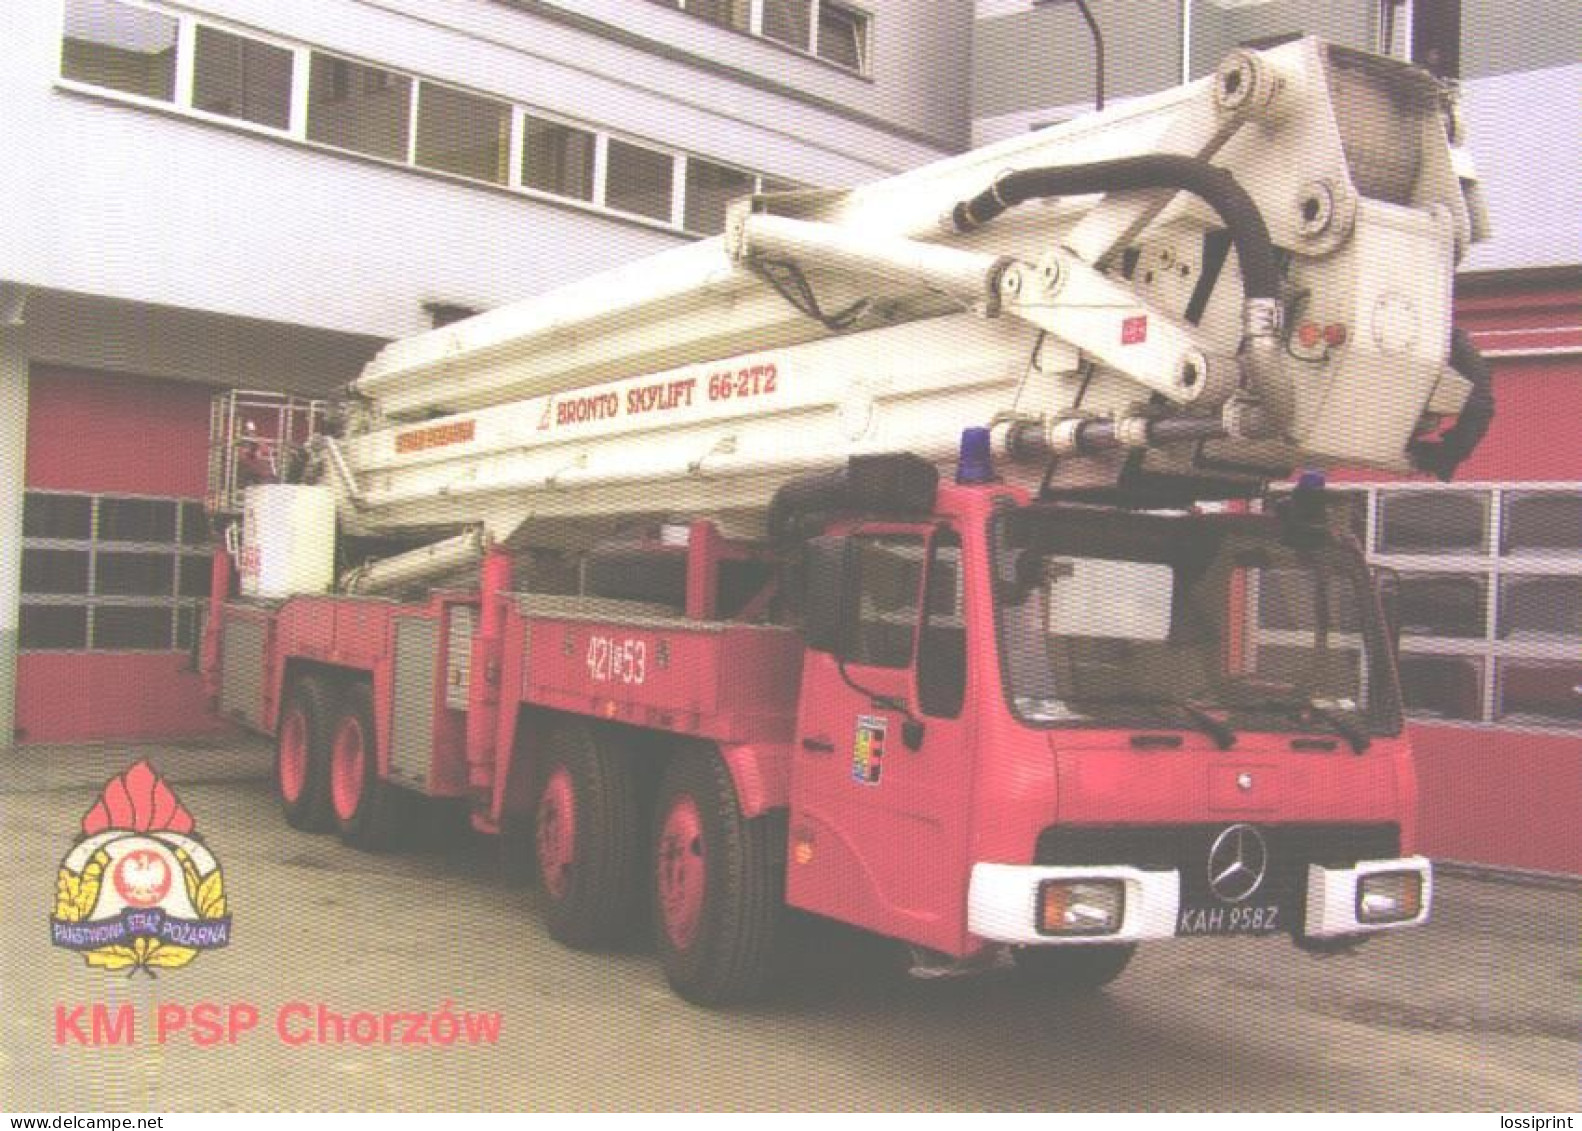 Fire Engine Mercedes Benz 4428 With Bronto Skylift 66-2T2 - Camión & Camioneta